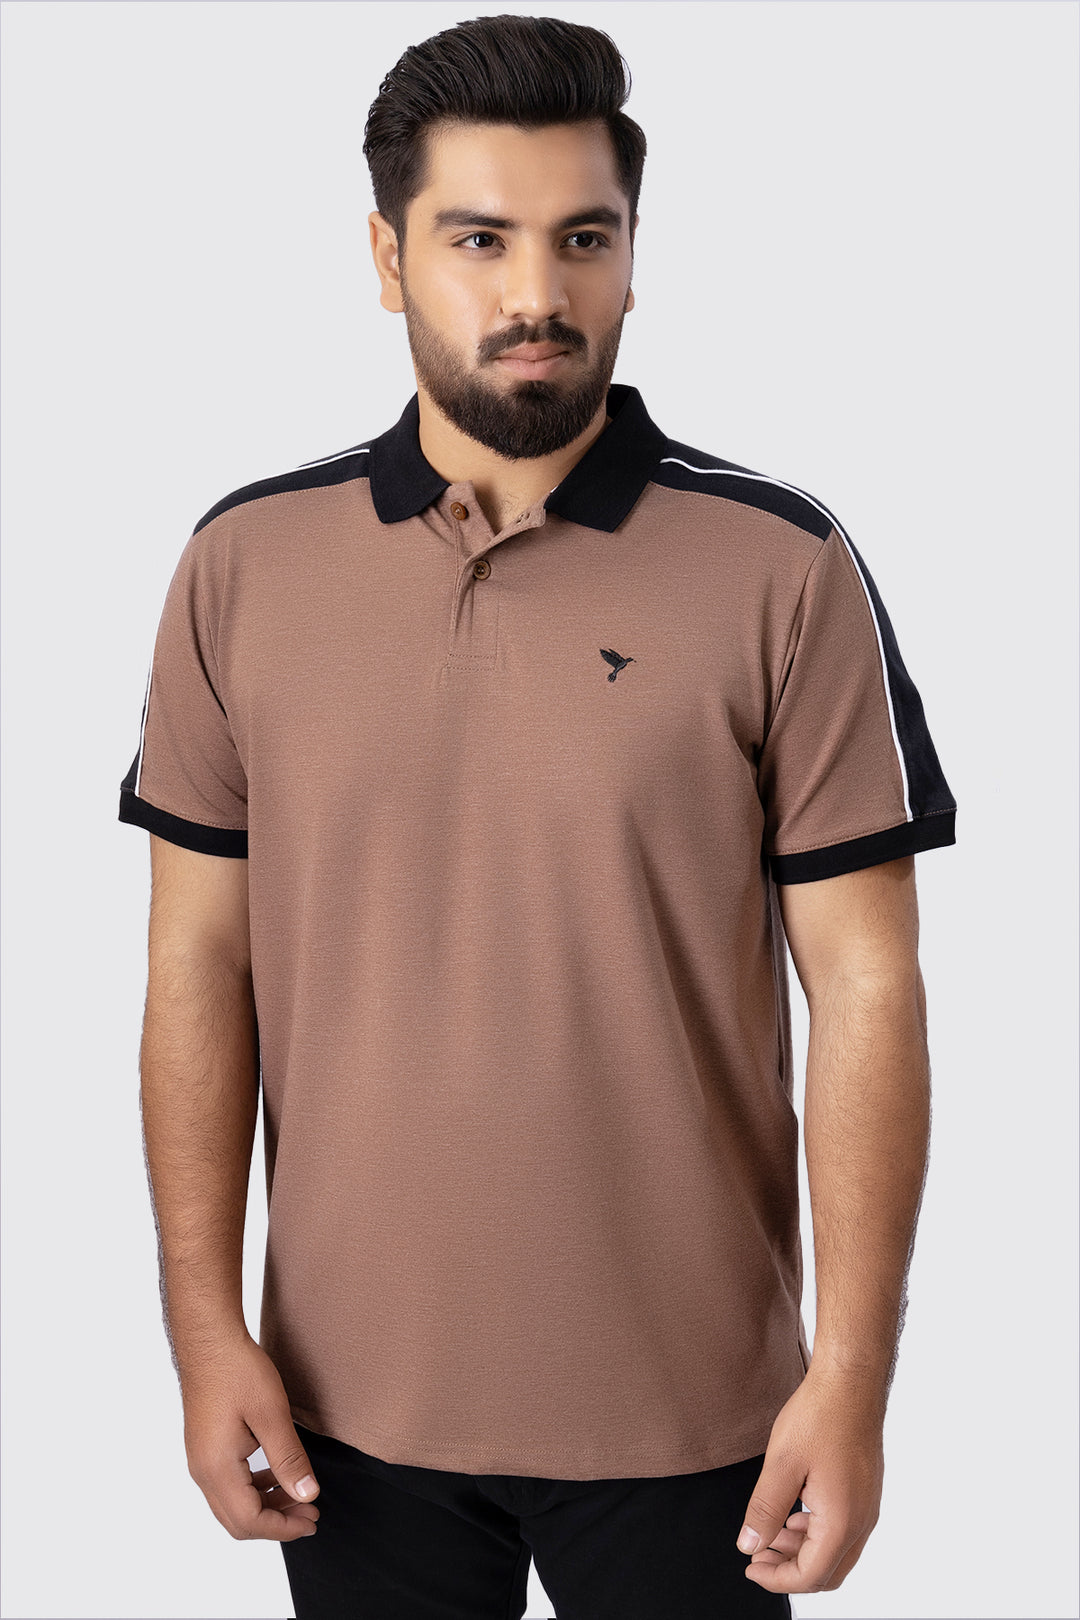 Brown Melange Embroidered Polo Shirt (Plus Size) - A23 - MP0179P